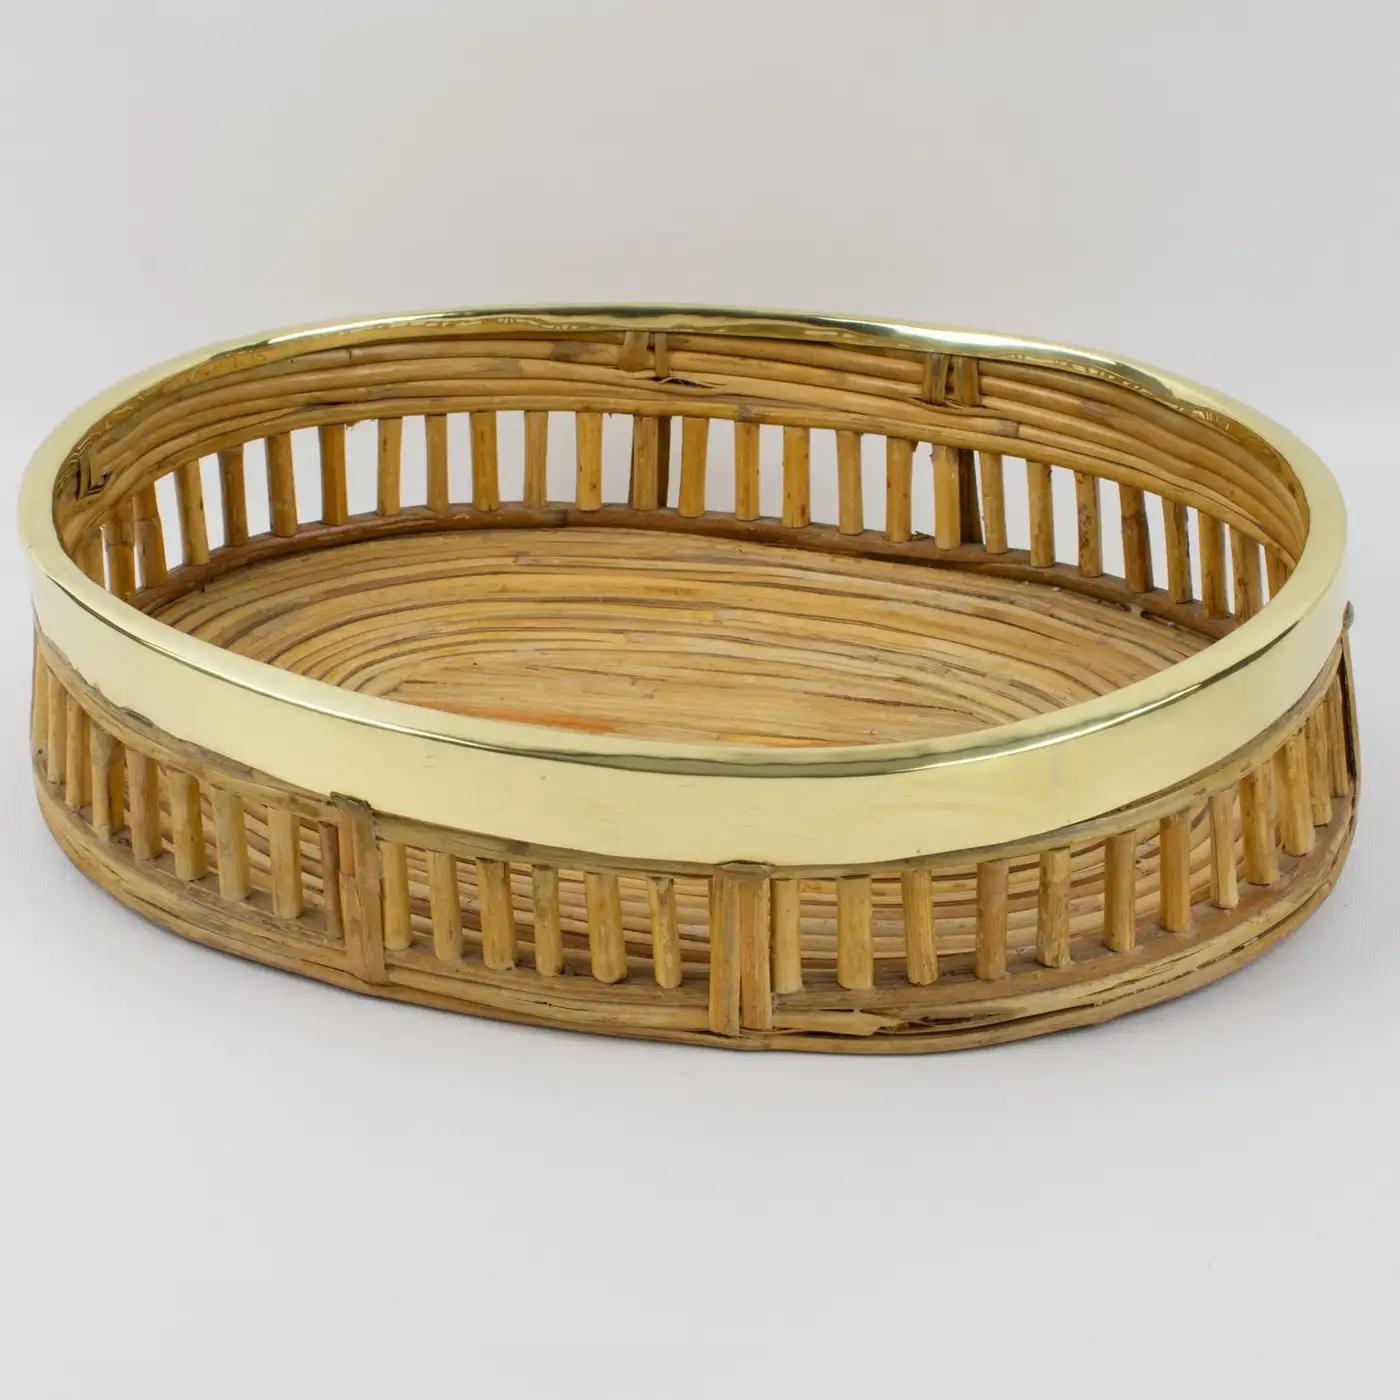 Mid-Century Modern Rattan Bamboo Wicker and Brass Bowl Basket Centerpiece, Italy 1960s For Sale